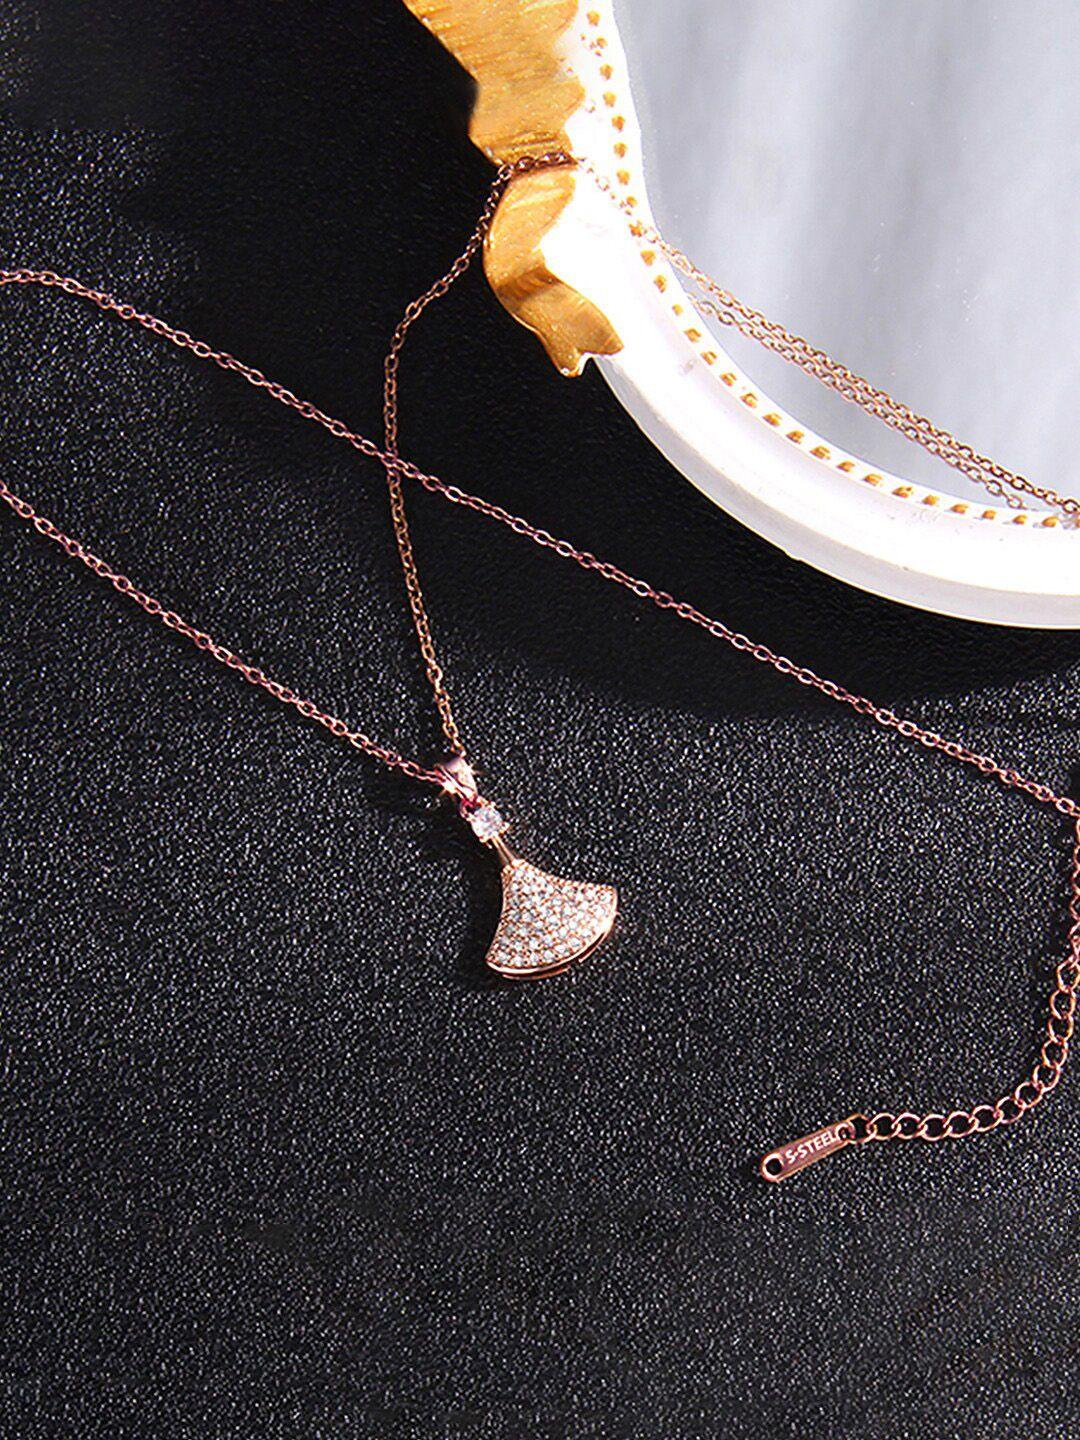 peora rose gold-plated ad studded pendant style chain necklace